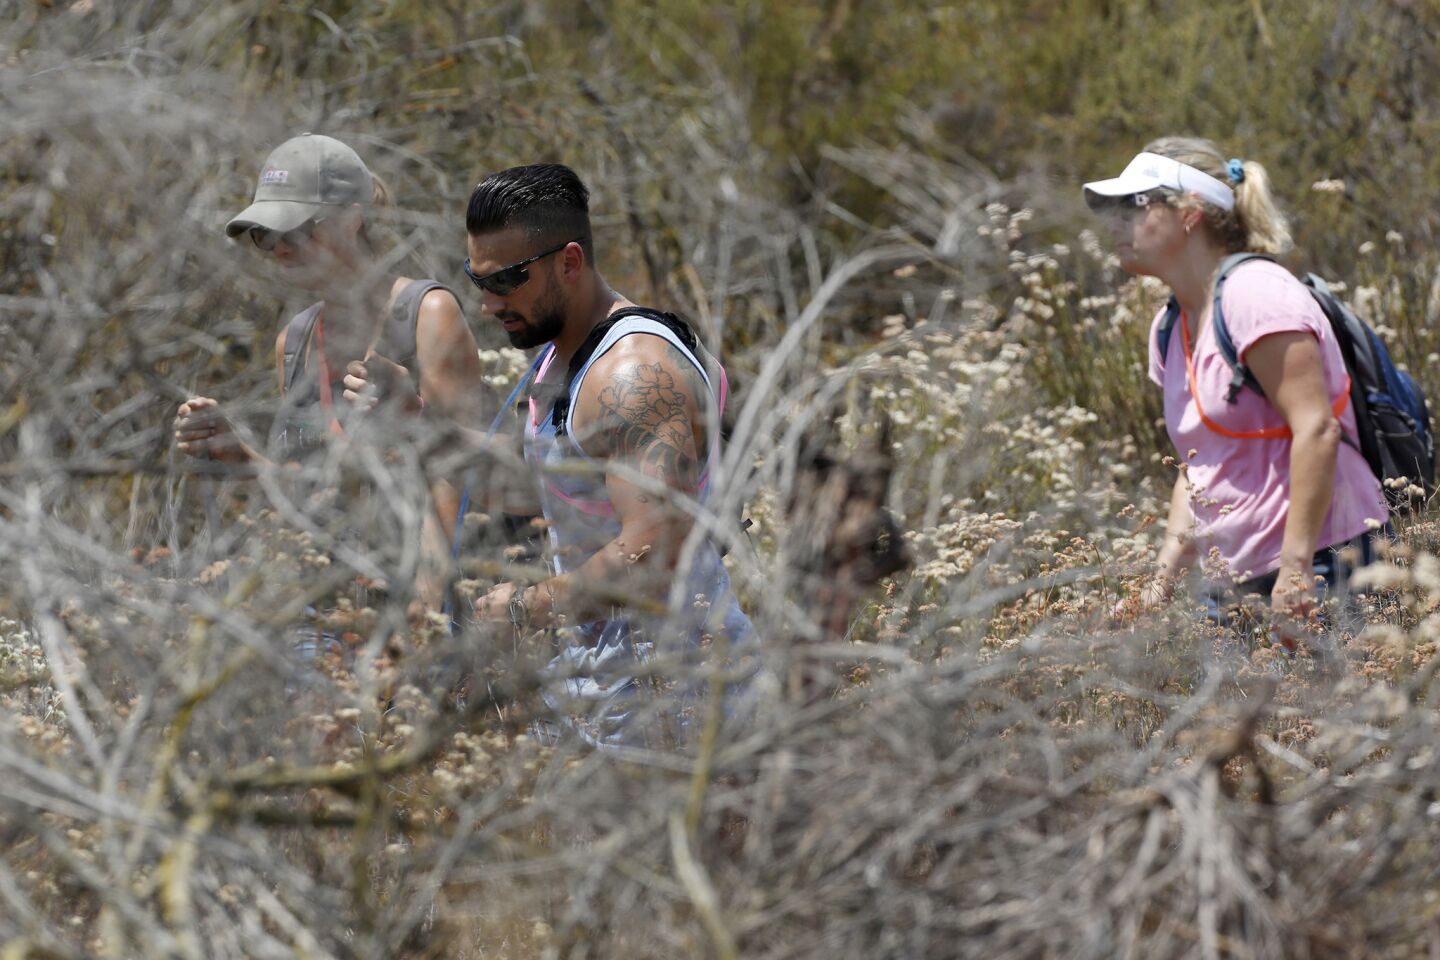 Volunteers ventured out under blazing sun to look for missing 11-year-old Terry Dewayne Smith.